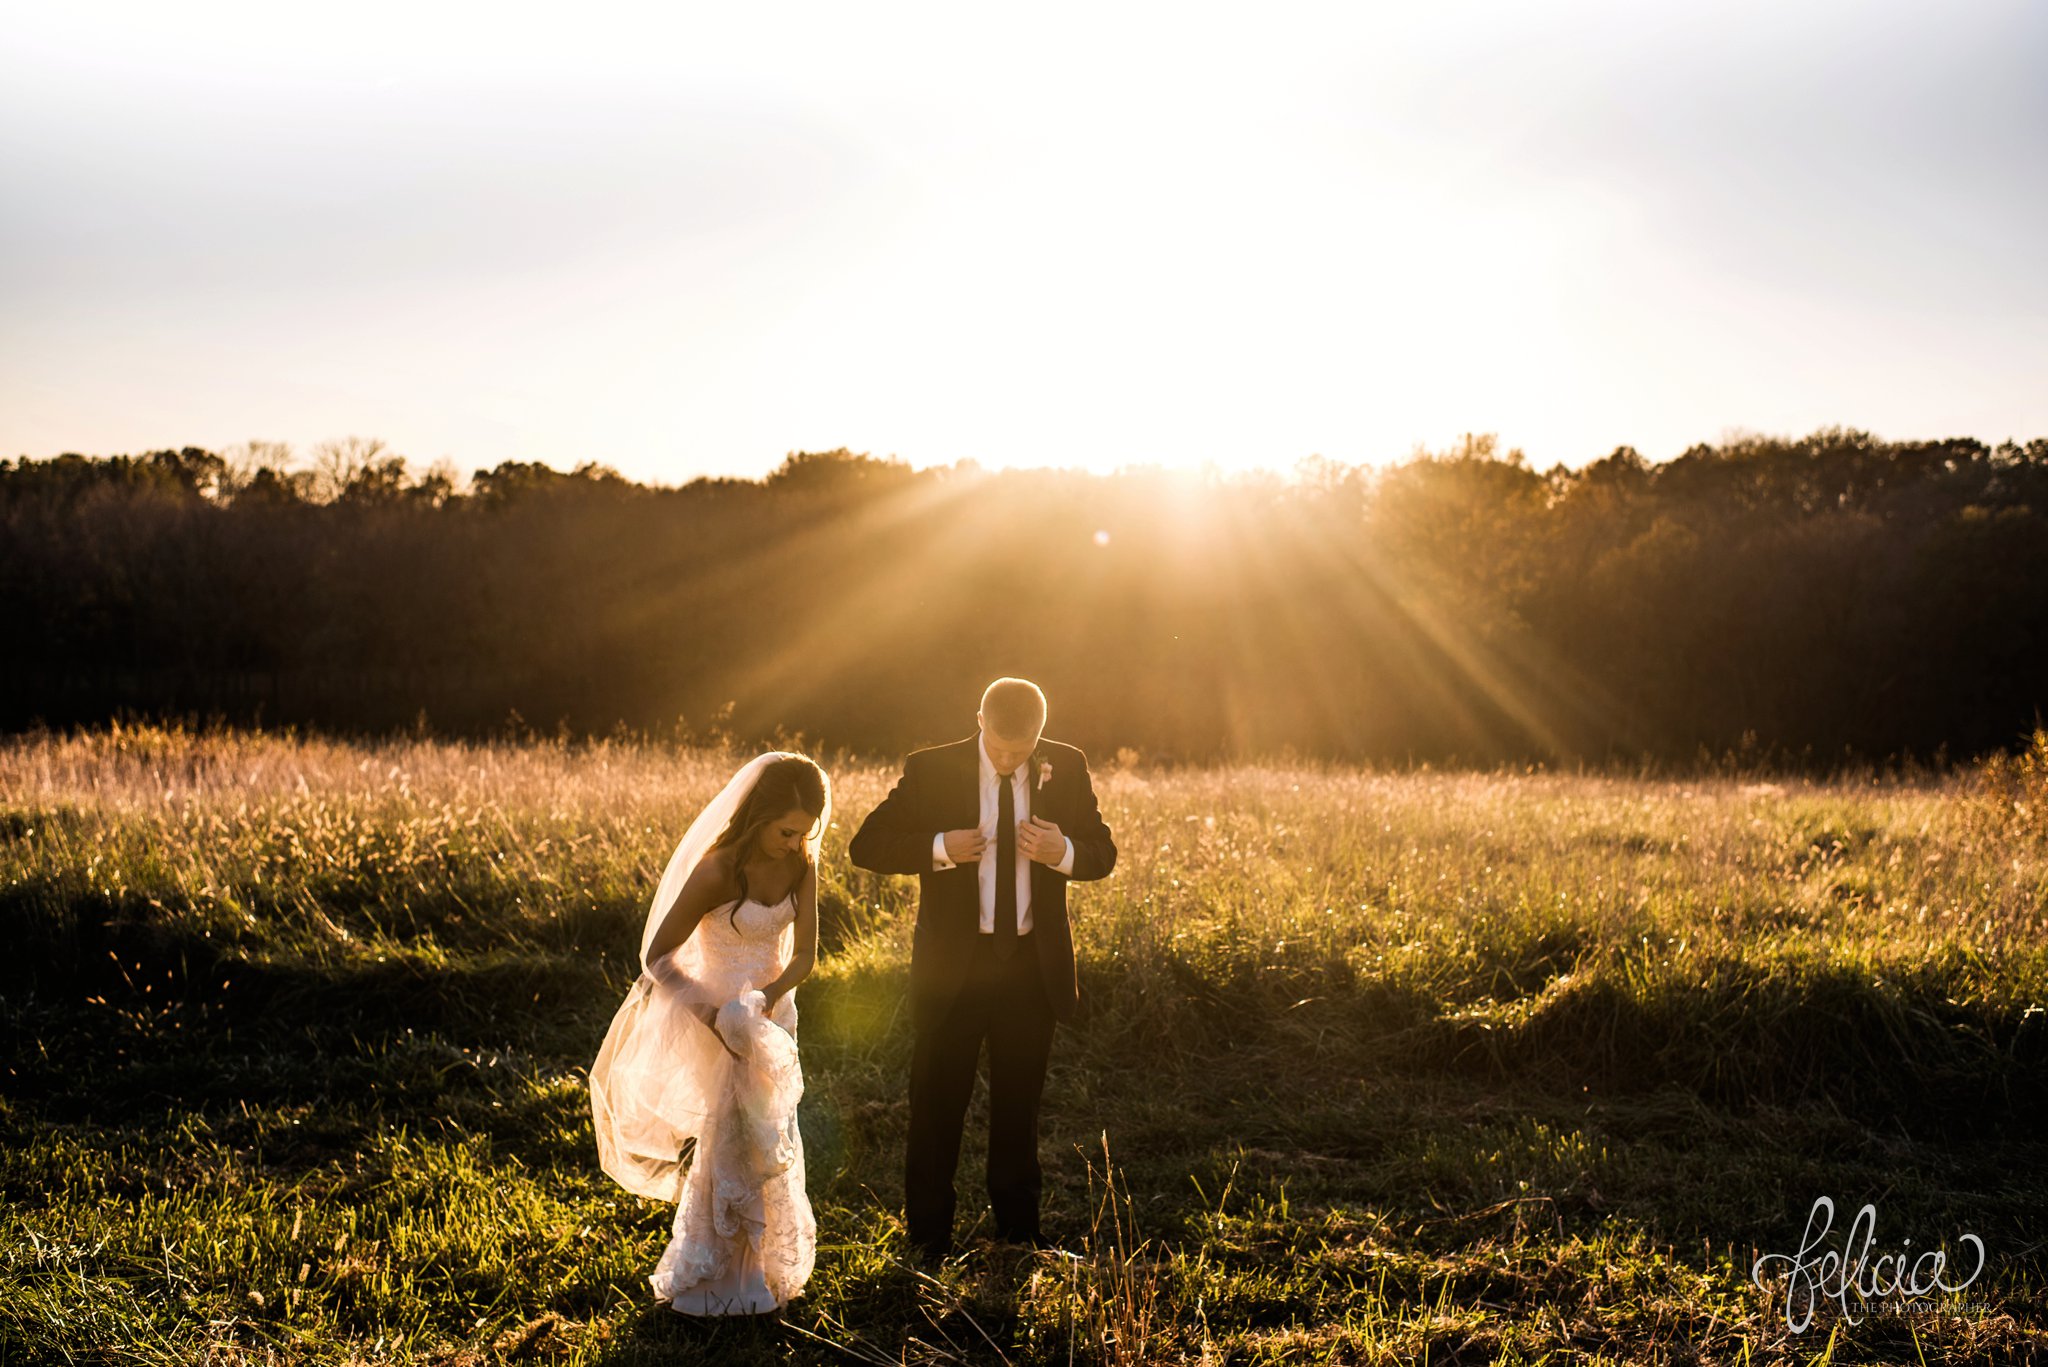 wedding | wedding photos | Rumely Event Space | wedding photography | images by feliciathephotographer.com | field background | nature | bride and groom portraits | sunlight | romantic sun | sun flare | candid | walking in field 